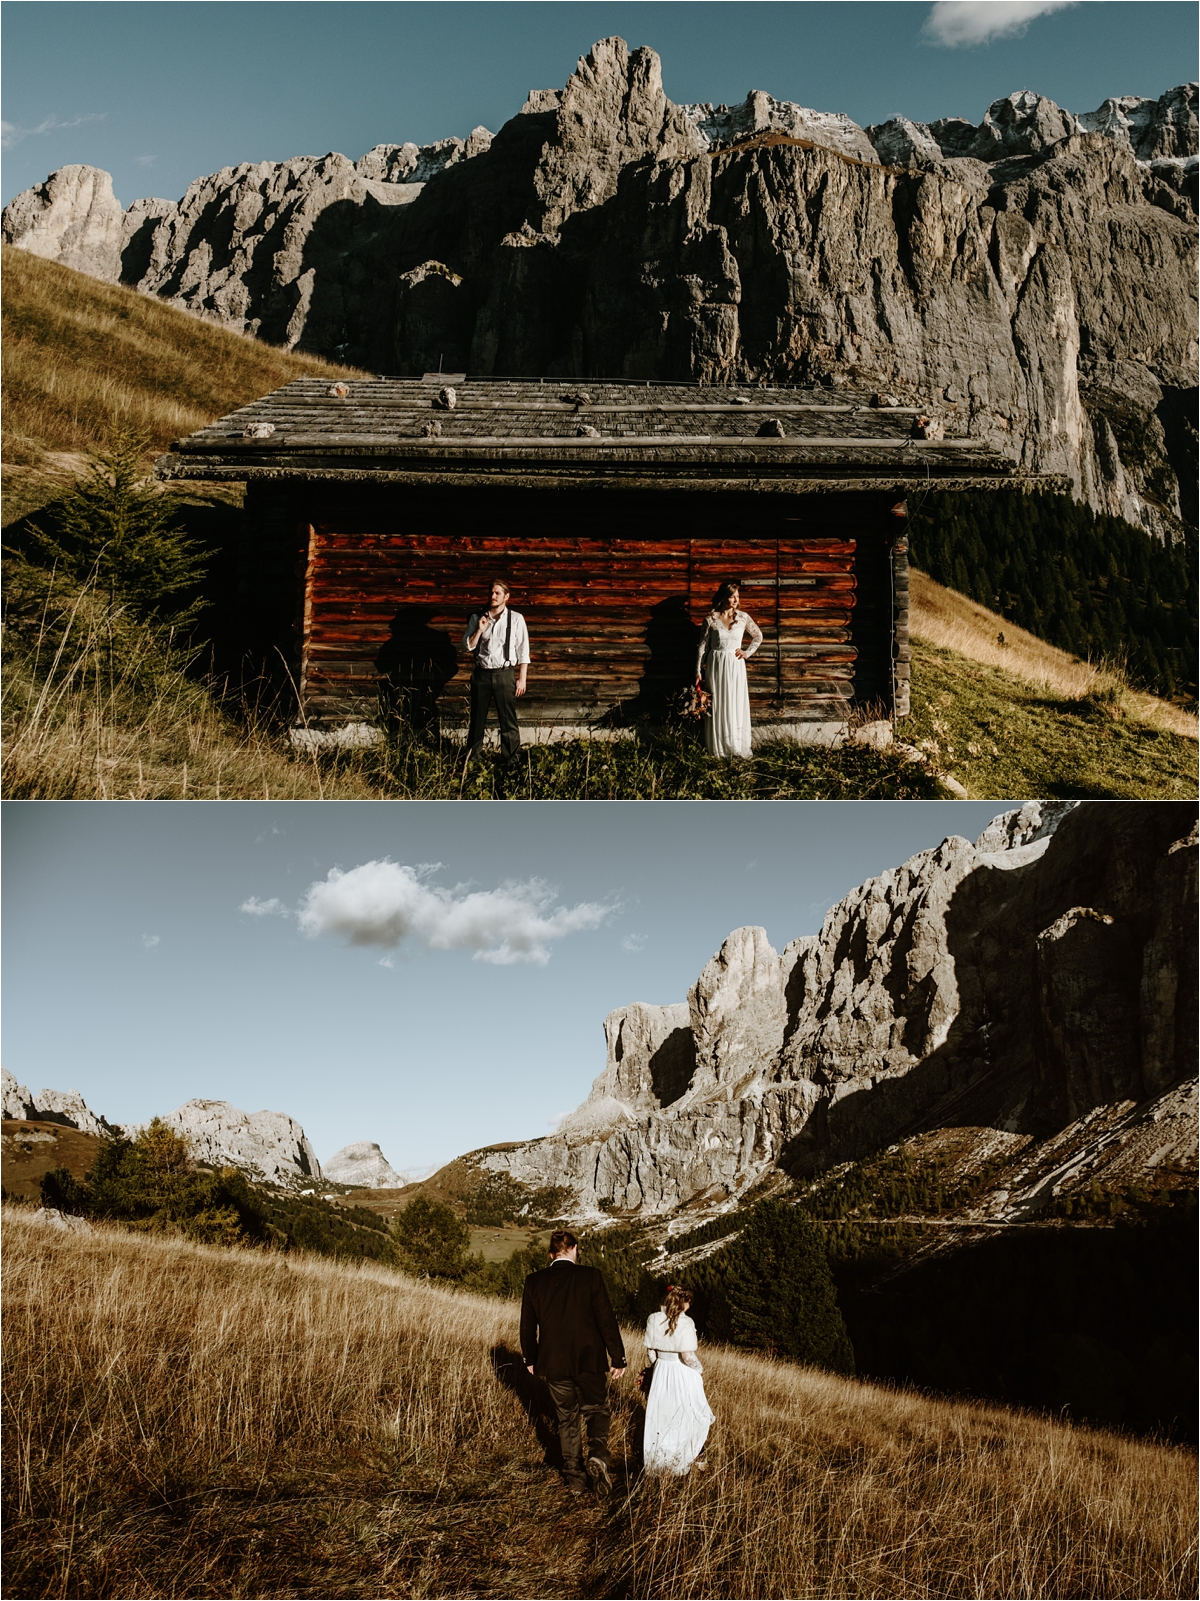 An elopement at a traditional wooden farmer's hut in the Dolomites. Photos by Wild Connections Photography